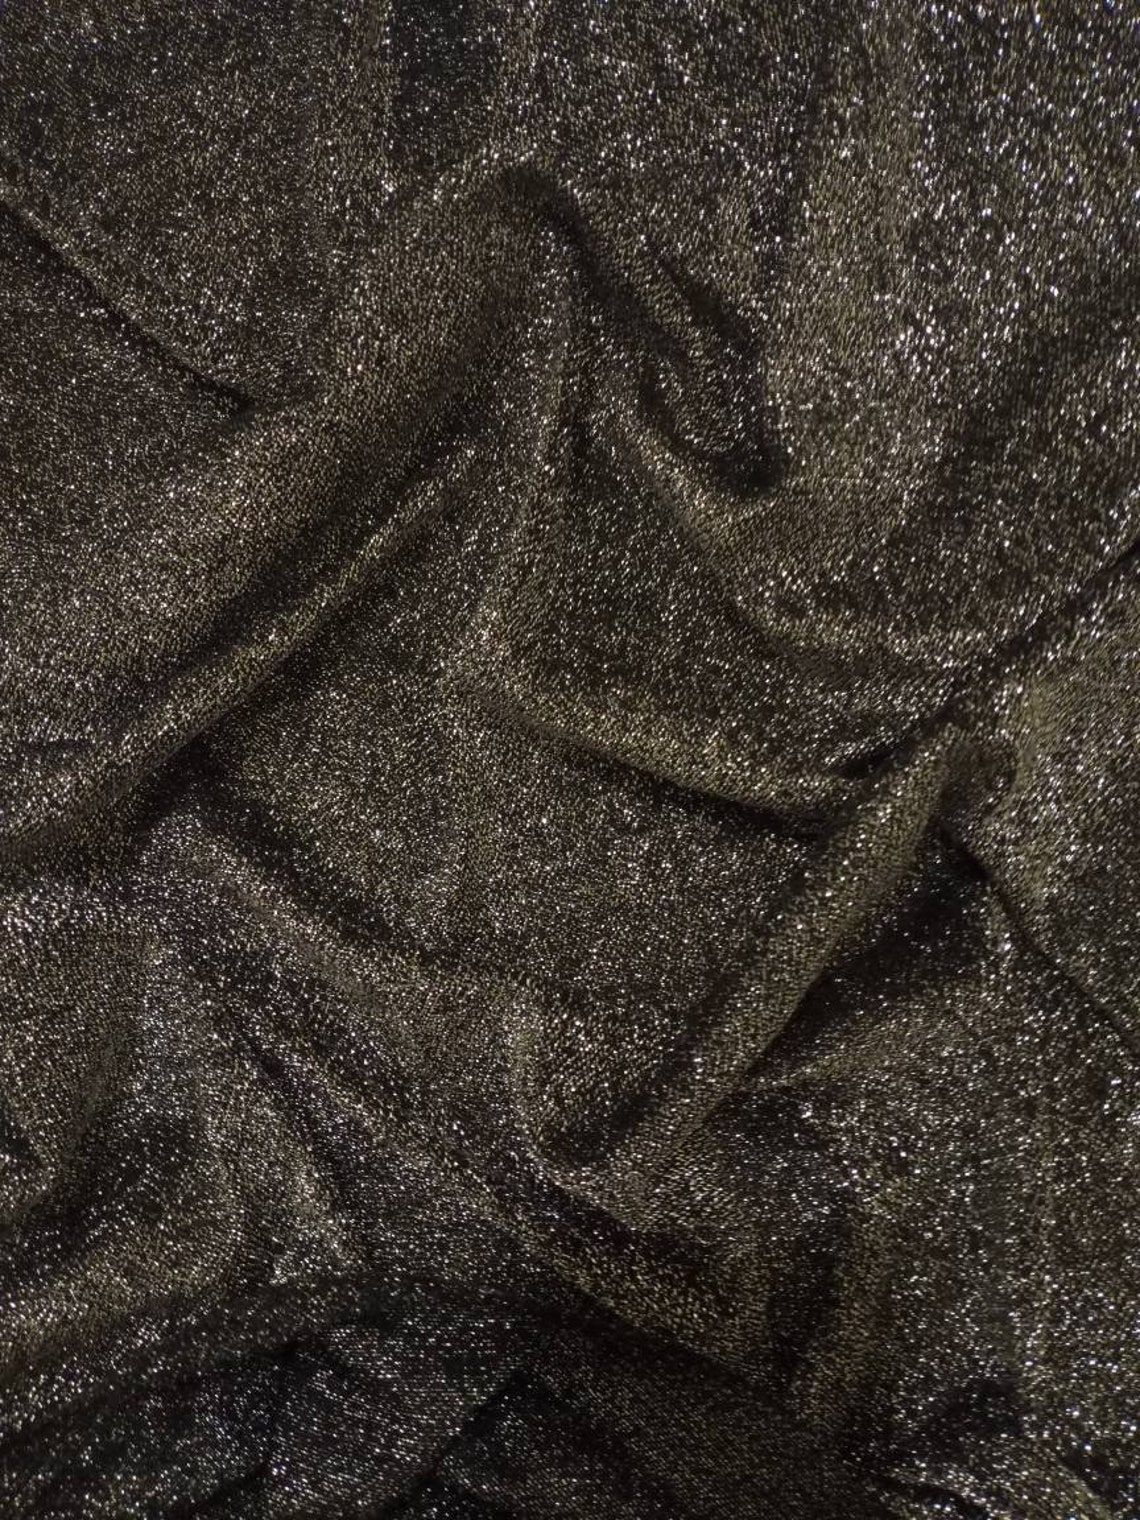 Black and Silver Sparkles Fabric Gown Fabric Sold by the - Etsy